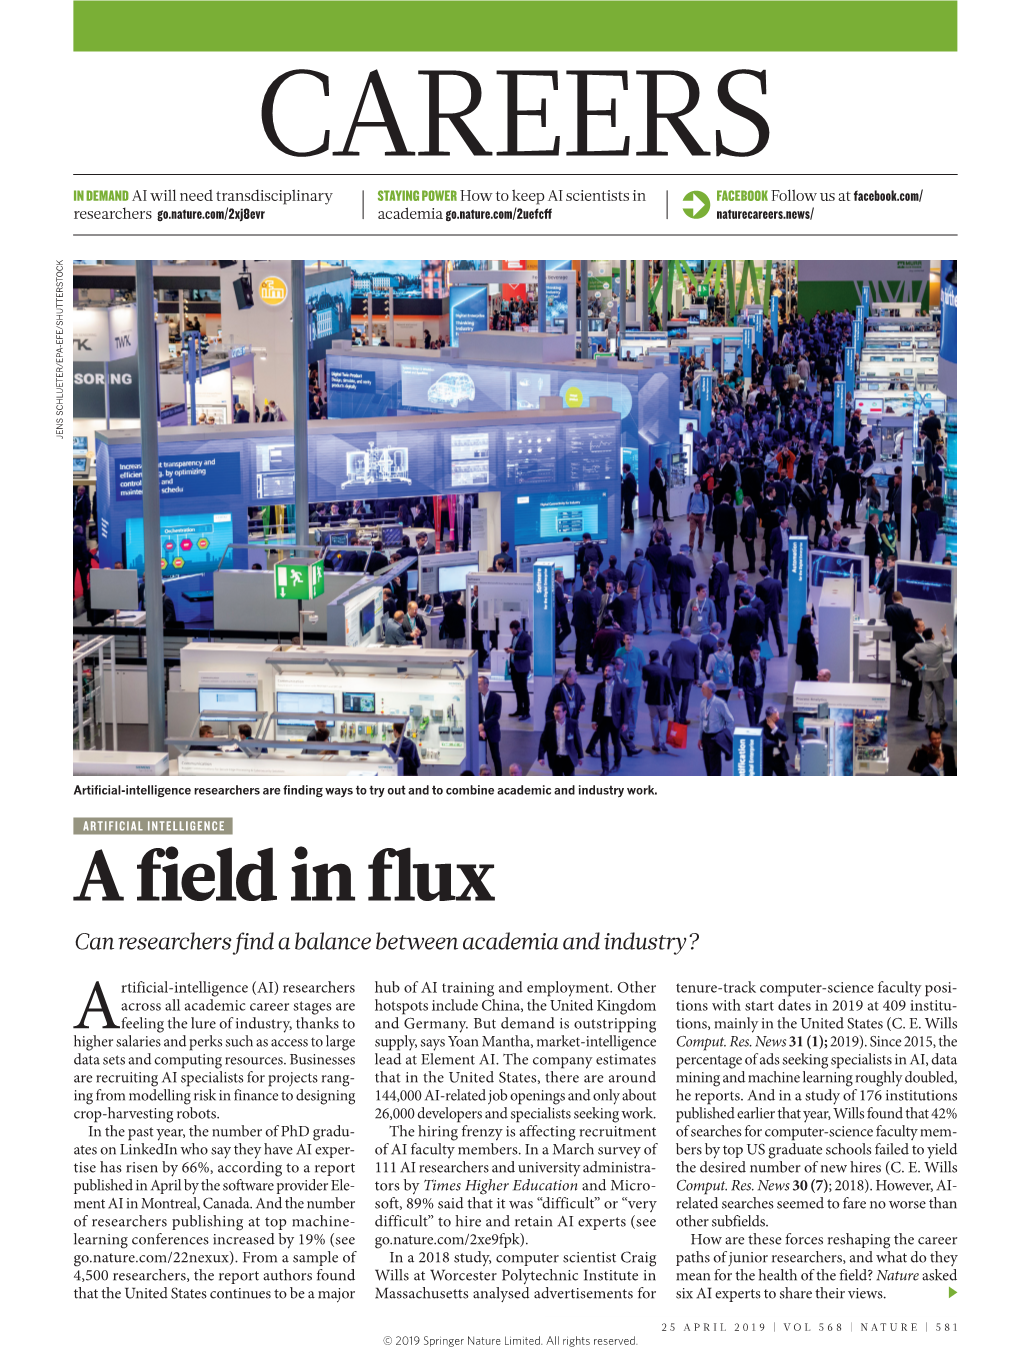 A Field in Flux Can Researchers Find a Balance Between Academia and Industry?